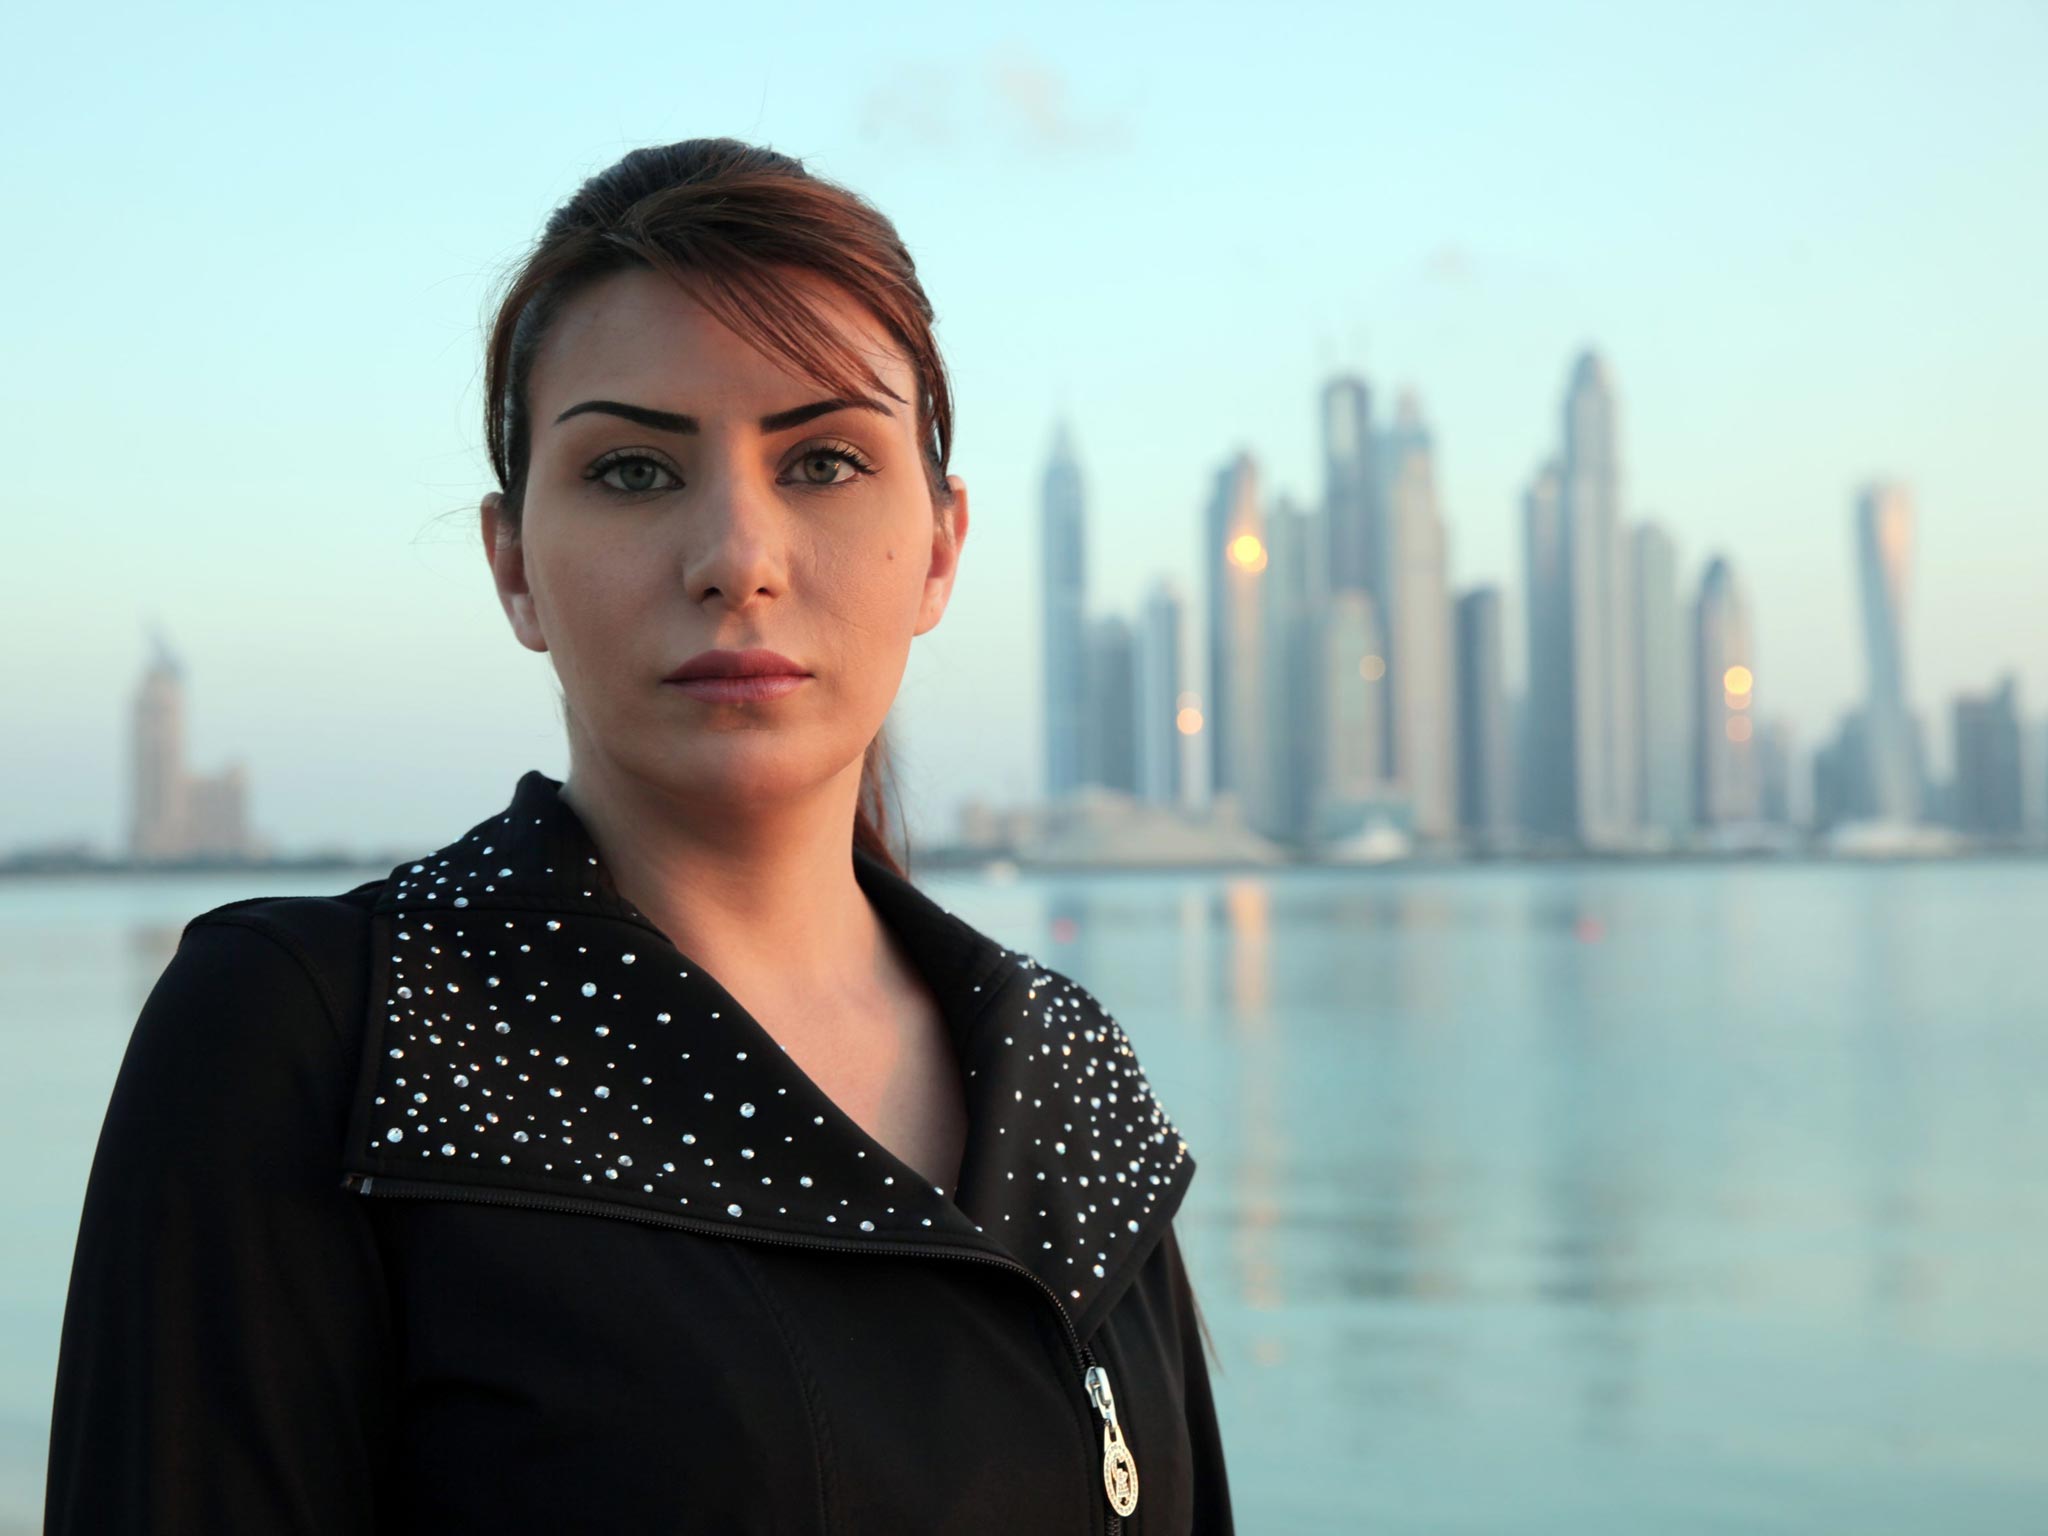 Atena Yazdi as she appears in the BBC Panorama programme Kidnapped: Betrayed By Britain?